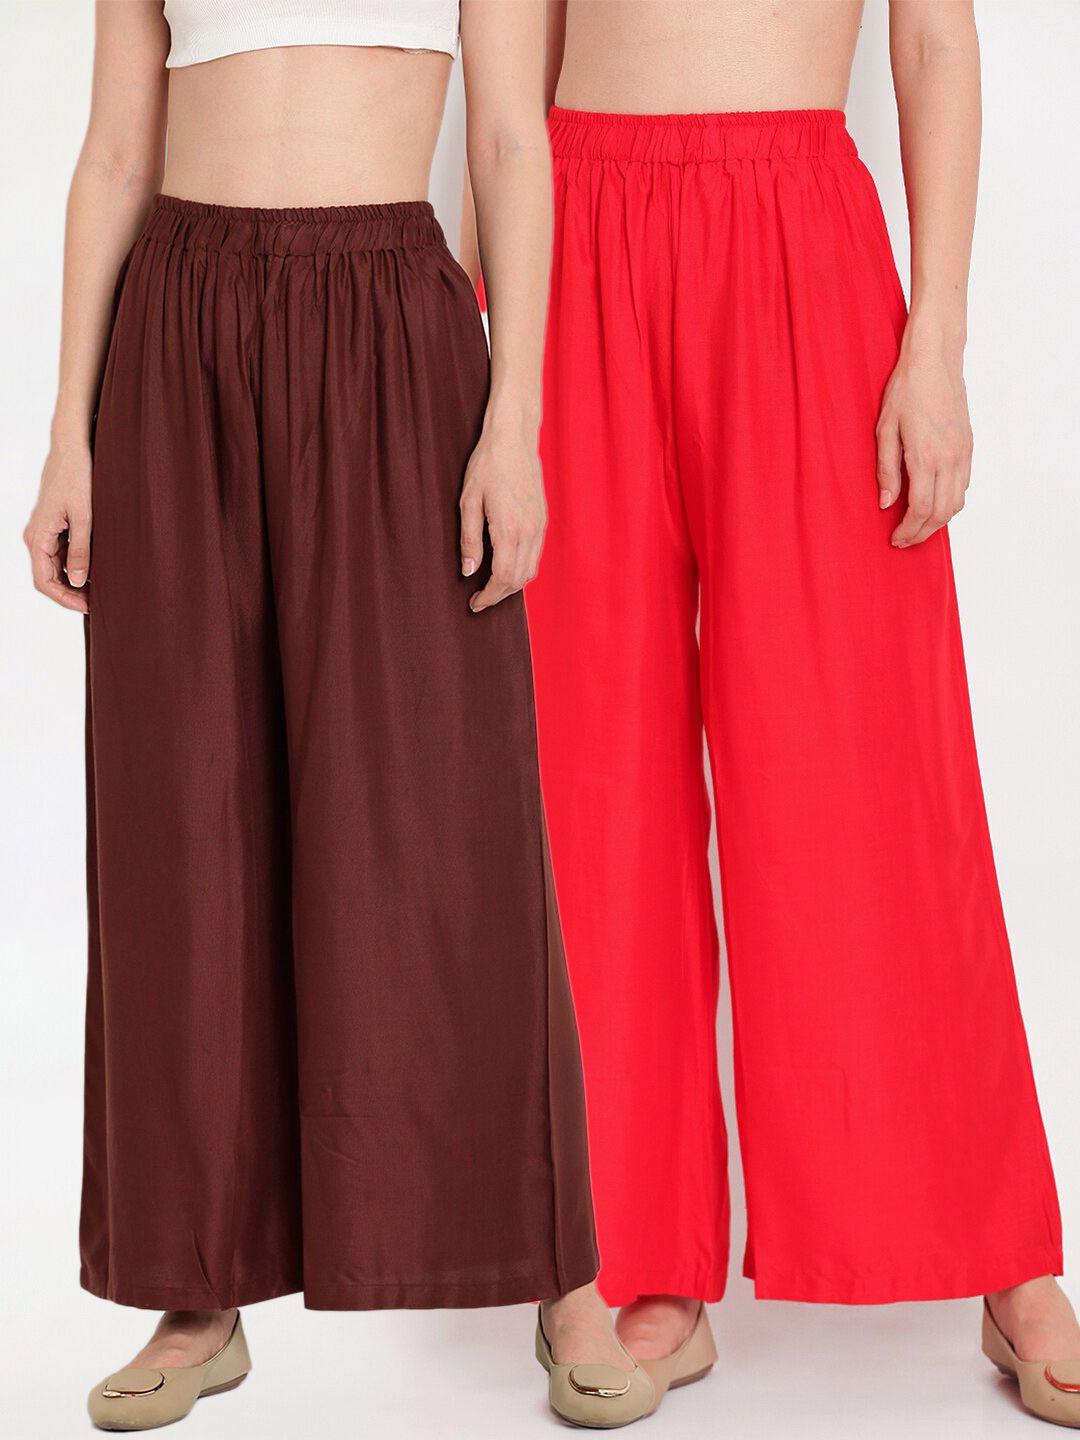 tag 7 women red & brown set of 2 flared ethnic palazzos